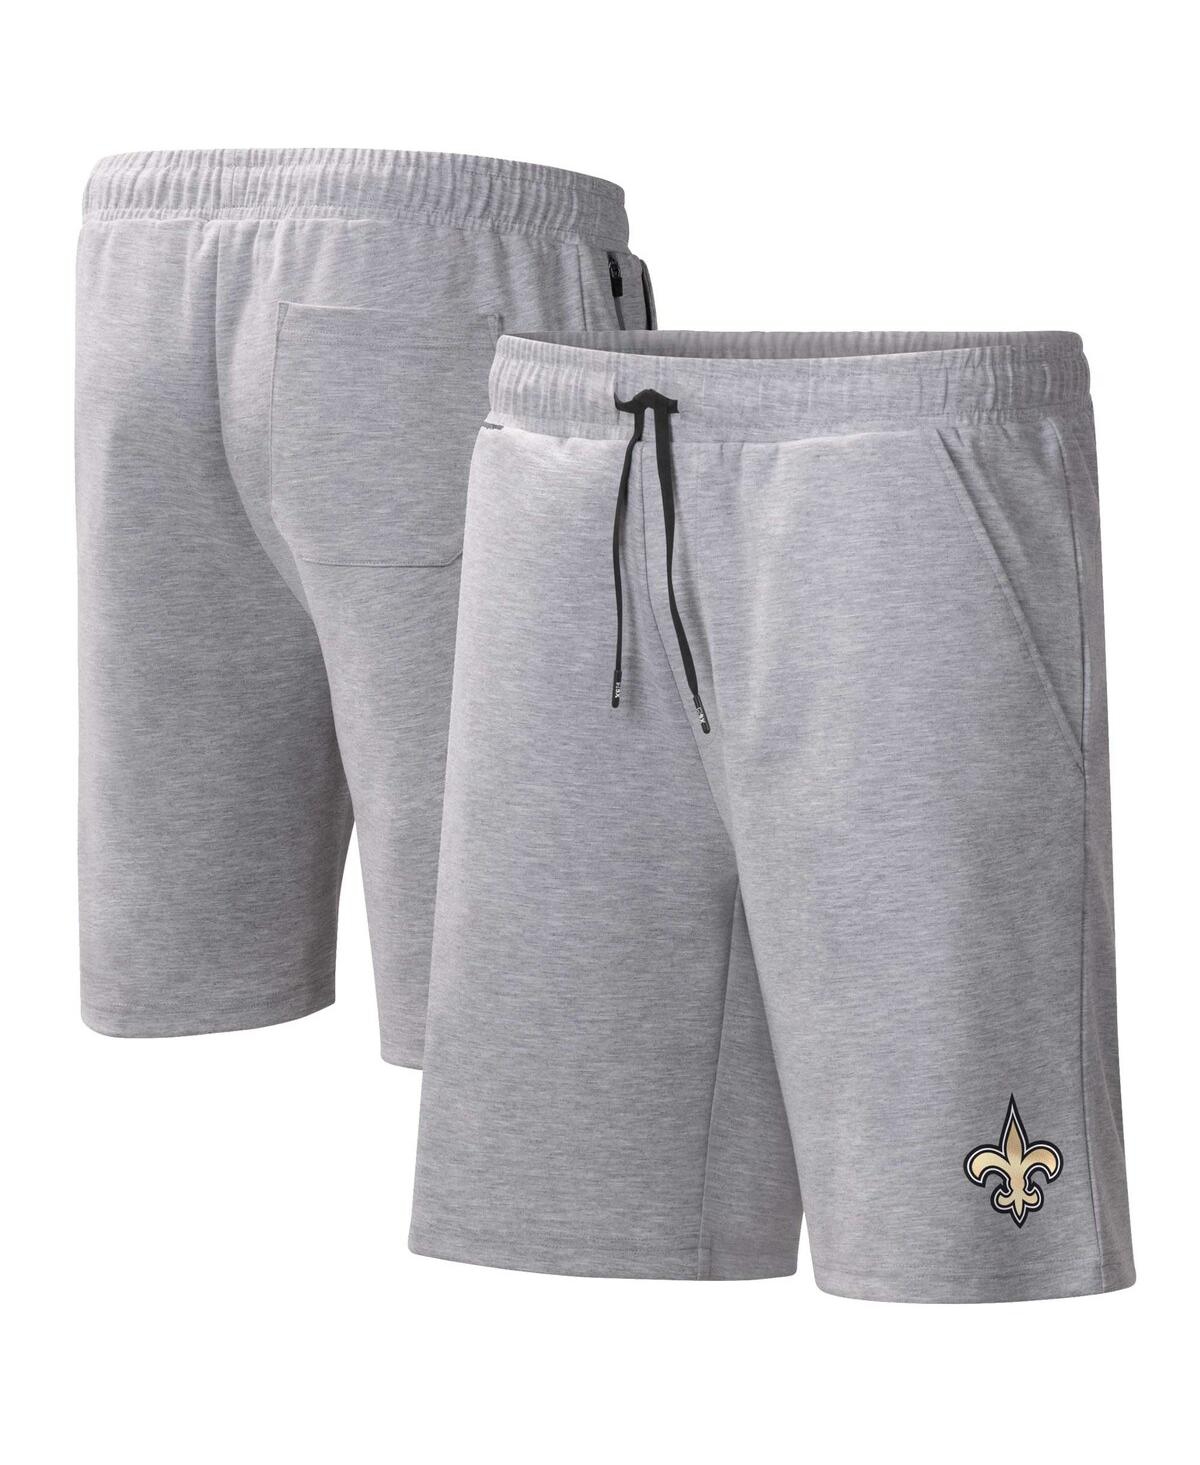 Men's Msx by Michael Strahan Heather Gray New Orleans Saints Trainer Shorts - Heather Gray